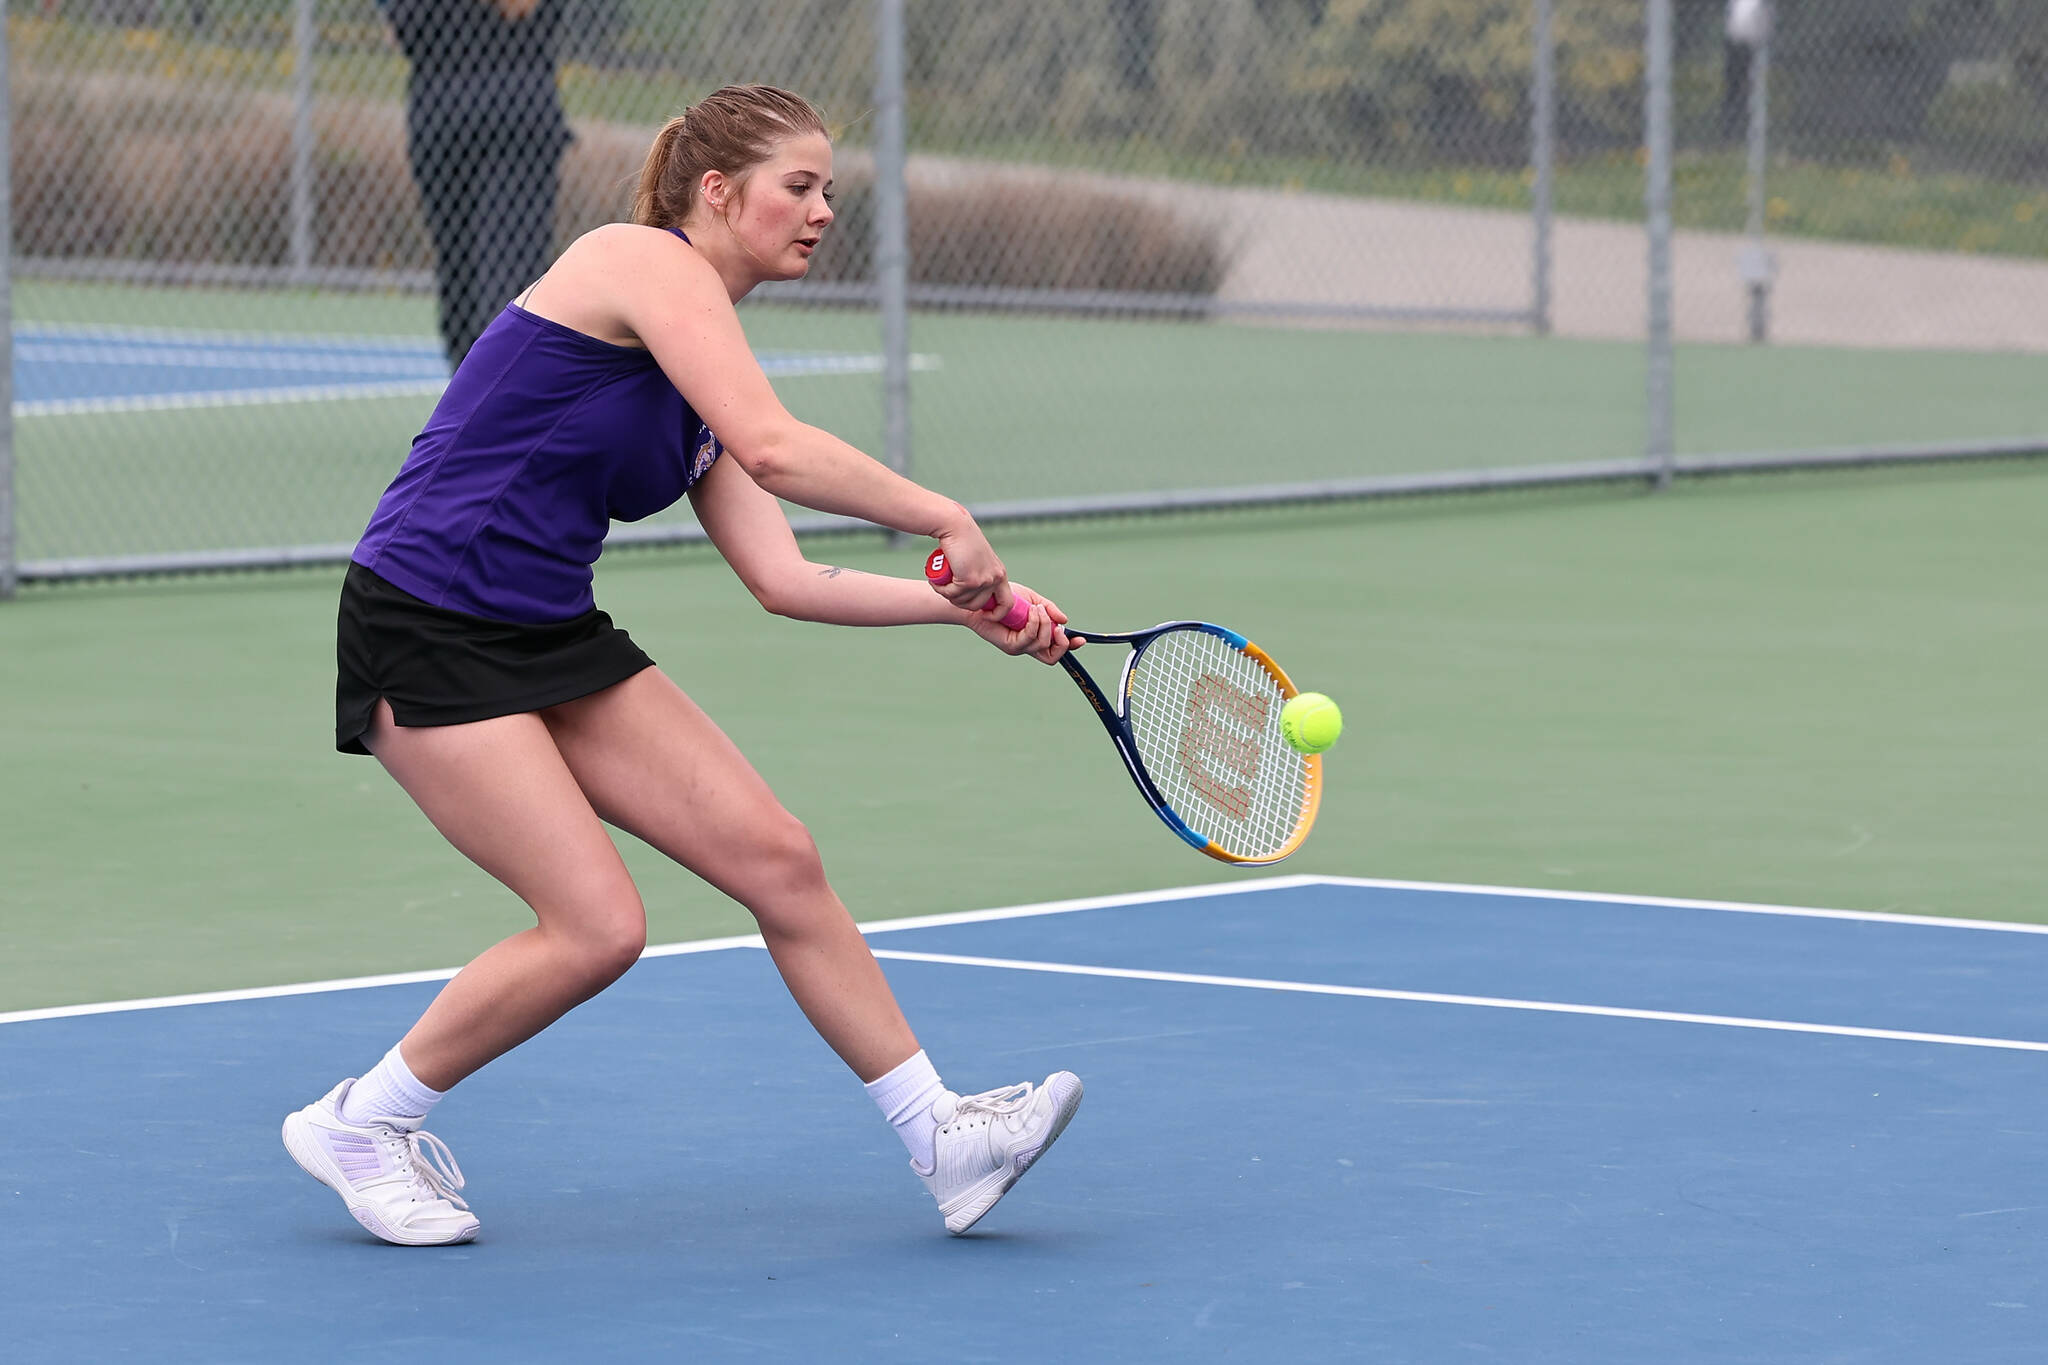 Oak Harbor athlete Jillian Knoll won second singles 6-3, 7-5 against Anacortes May 1. The Wildcats lost the match 3-4. (Photo by John Fisken)